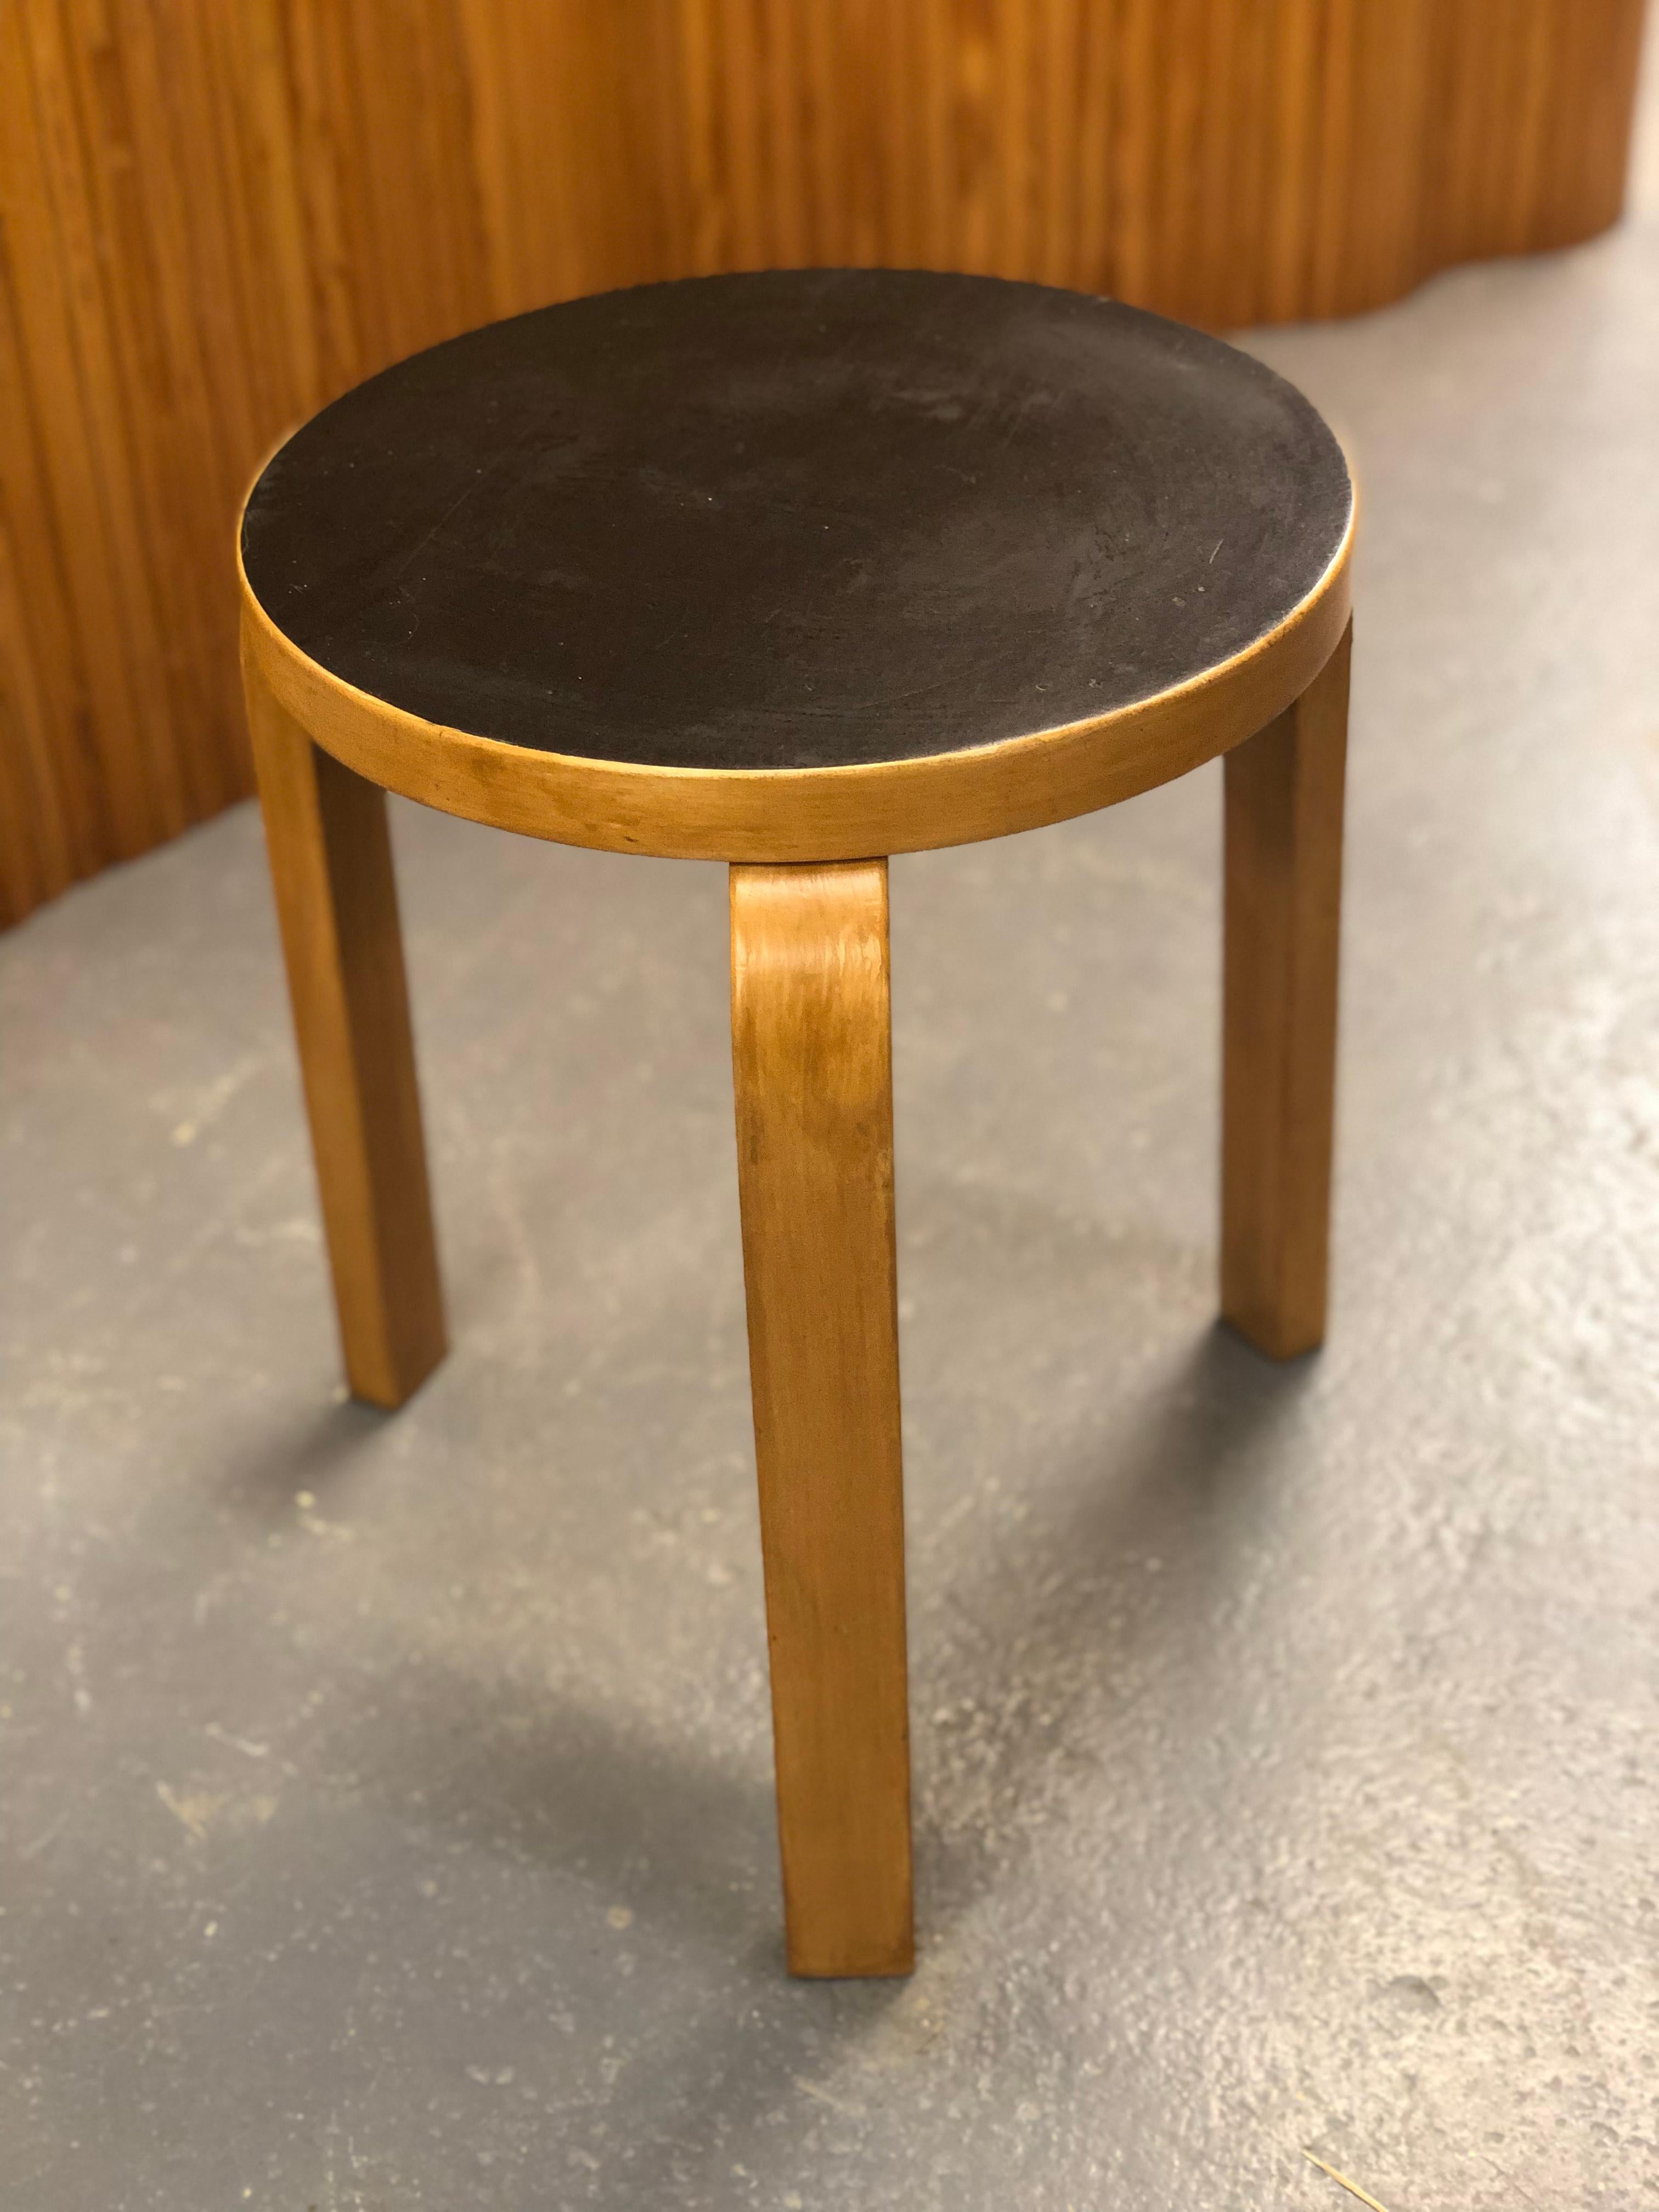 Artek stool in birch and black linoleum, designed by Alvar Aalto and manufactured by Artek in the 1950s. The model 60 stool is perhaps the most well known Aalto design and has always been attractive to people. As with a lot of Alvar Aalto's works 